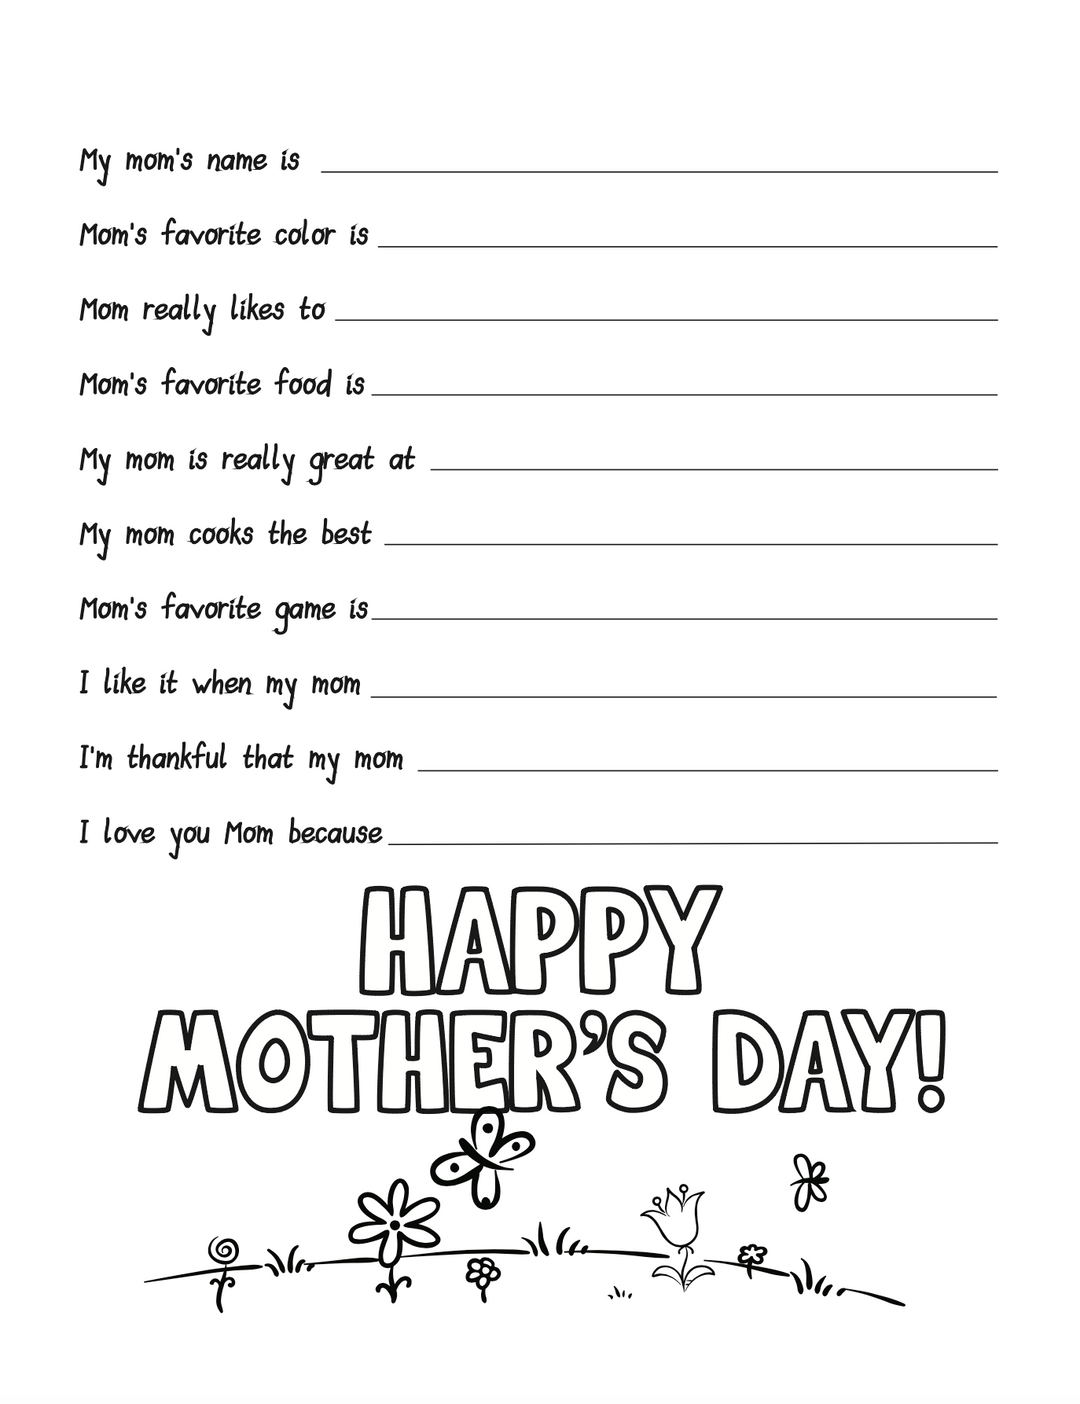 Mother's Day Questionaire